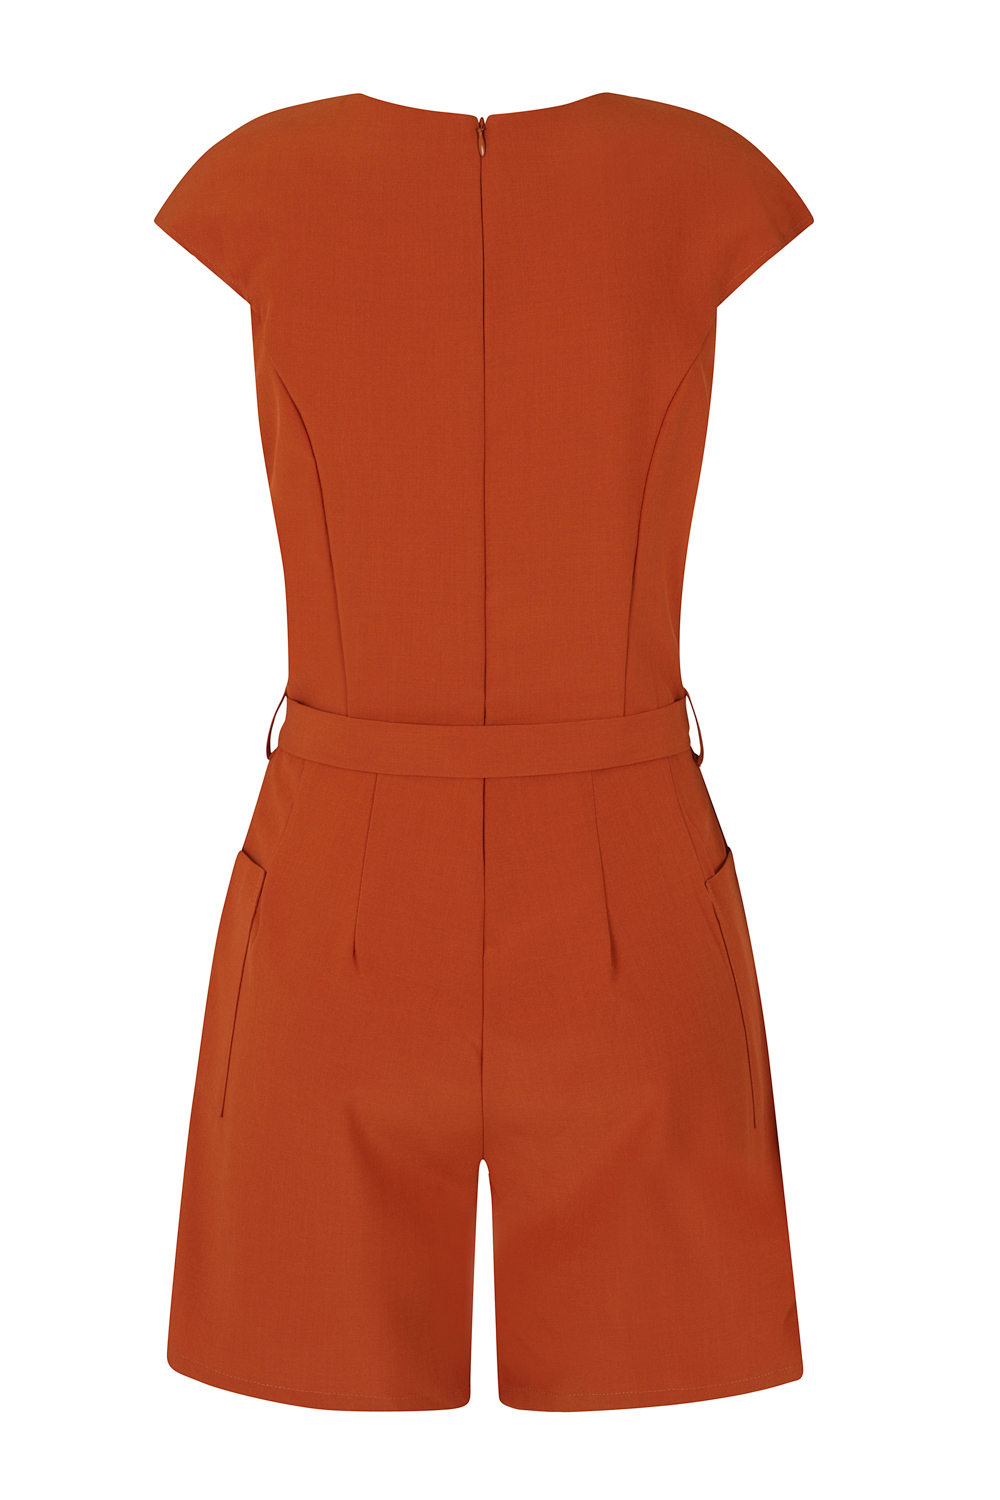 Betty Brown Playsuit